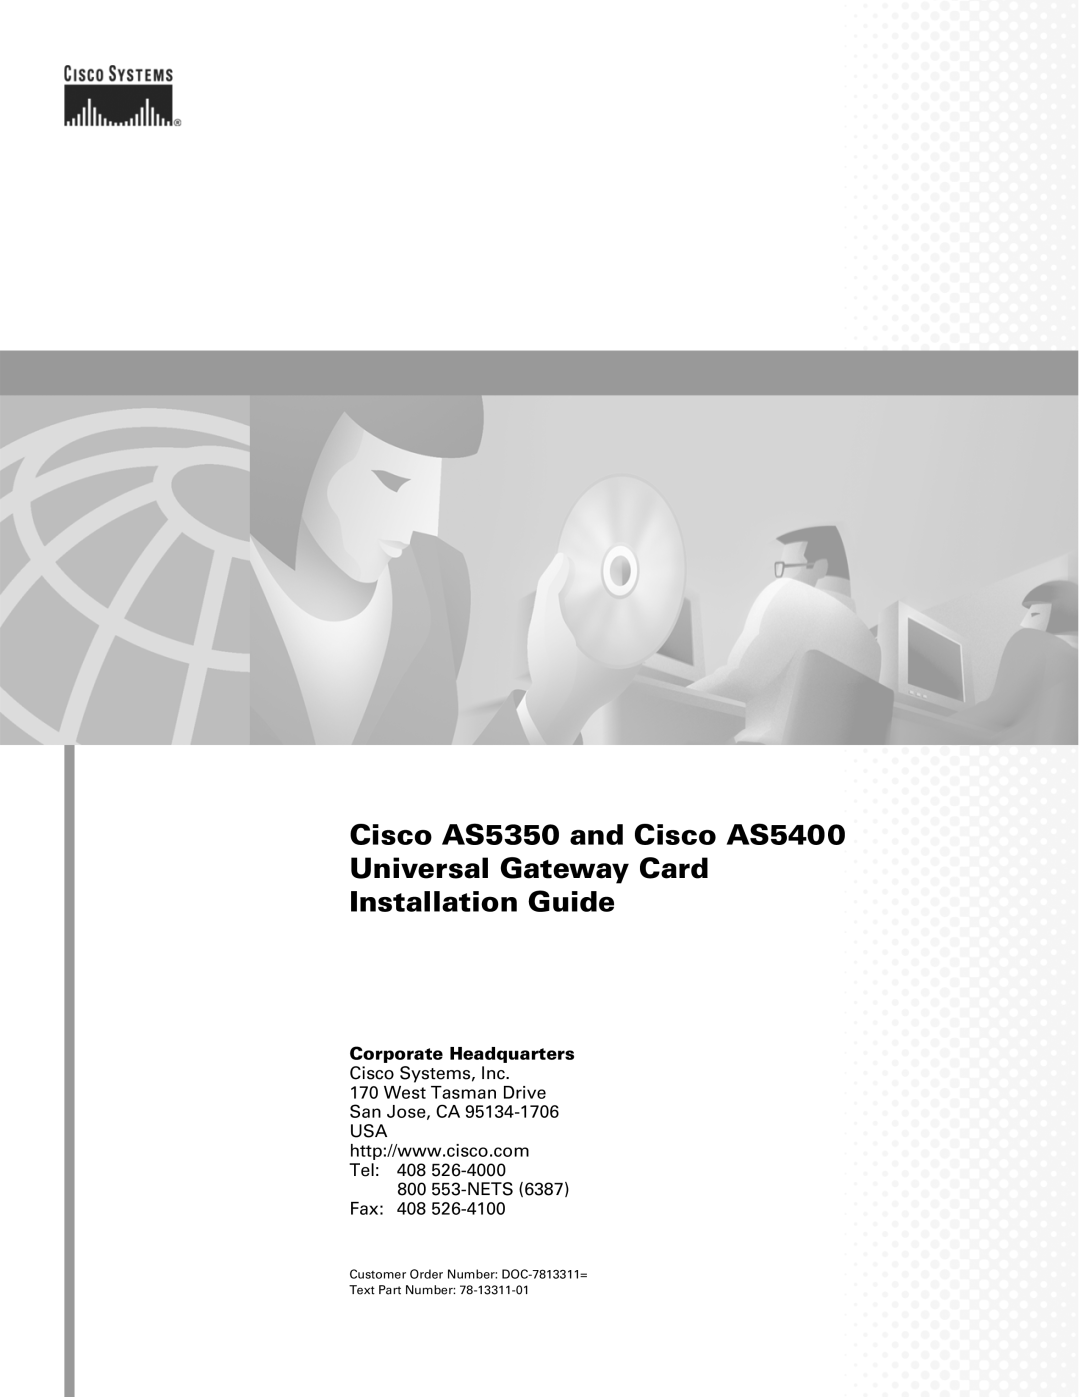 Cisco Systems manual Preparing to Install the Cisco AS5350 Chassis, Safety Recommendations, C H A P T E R 